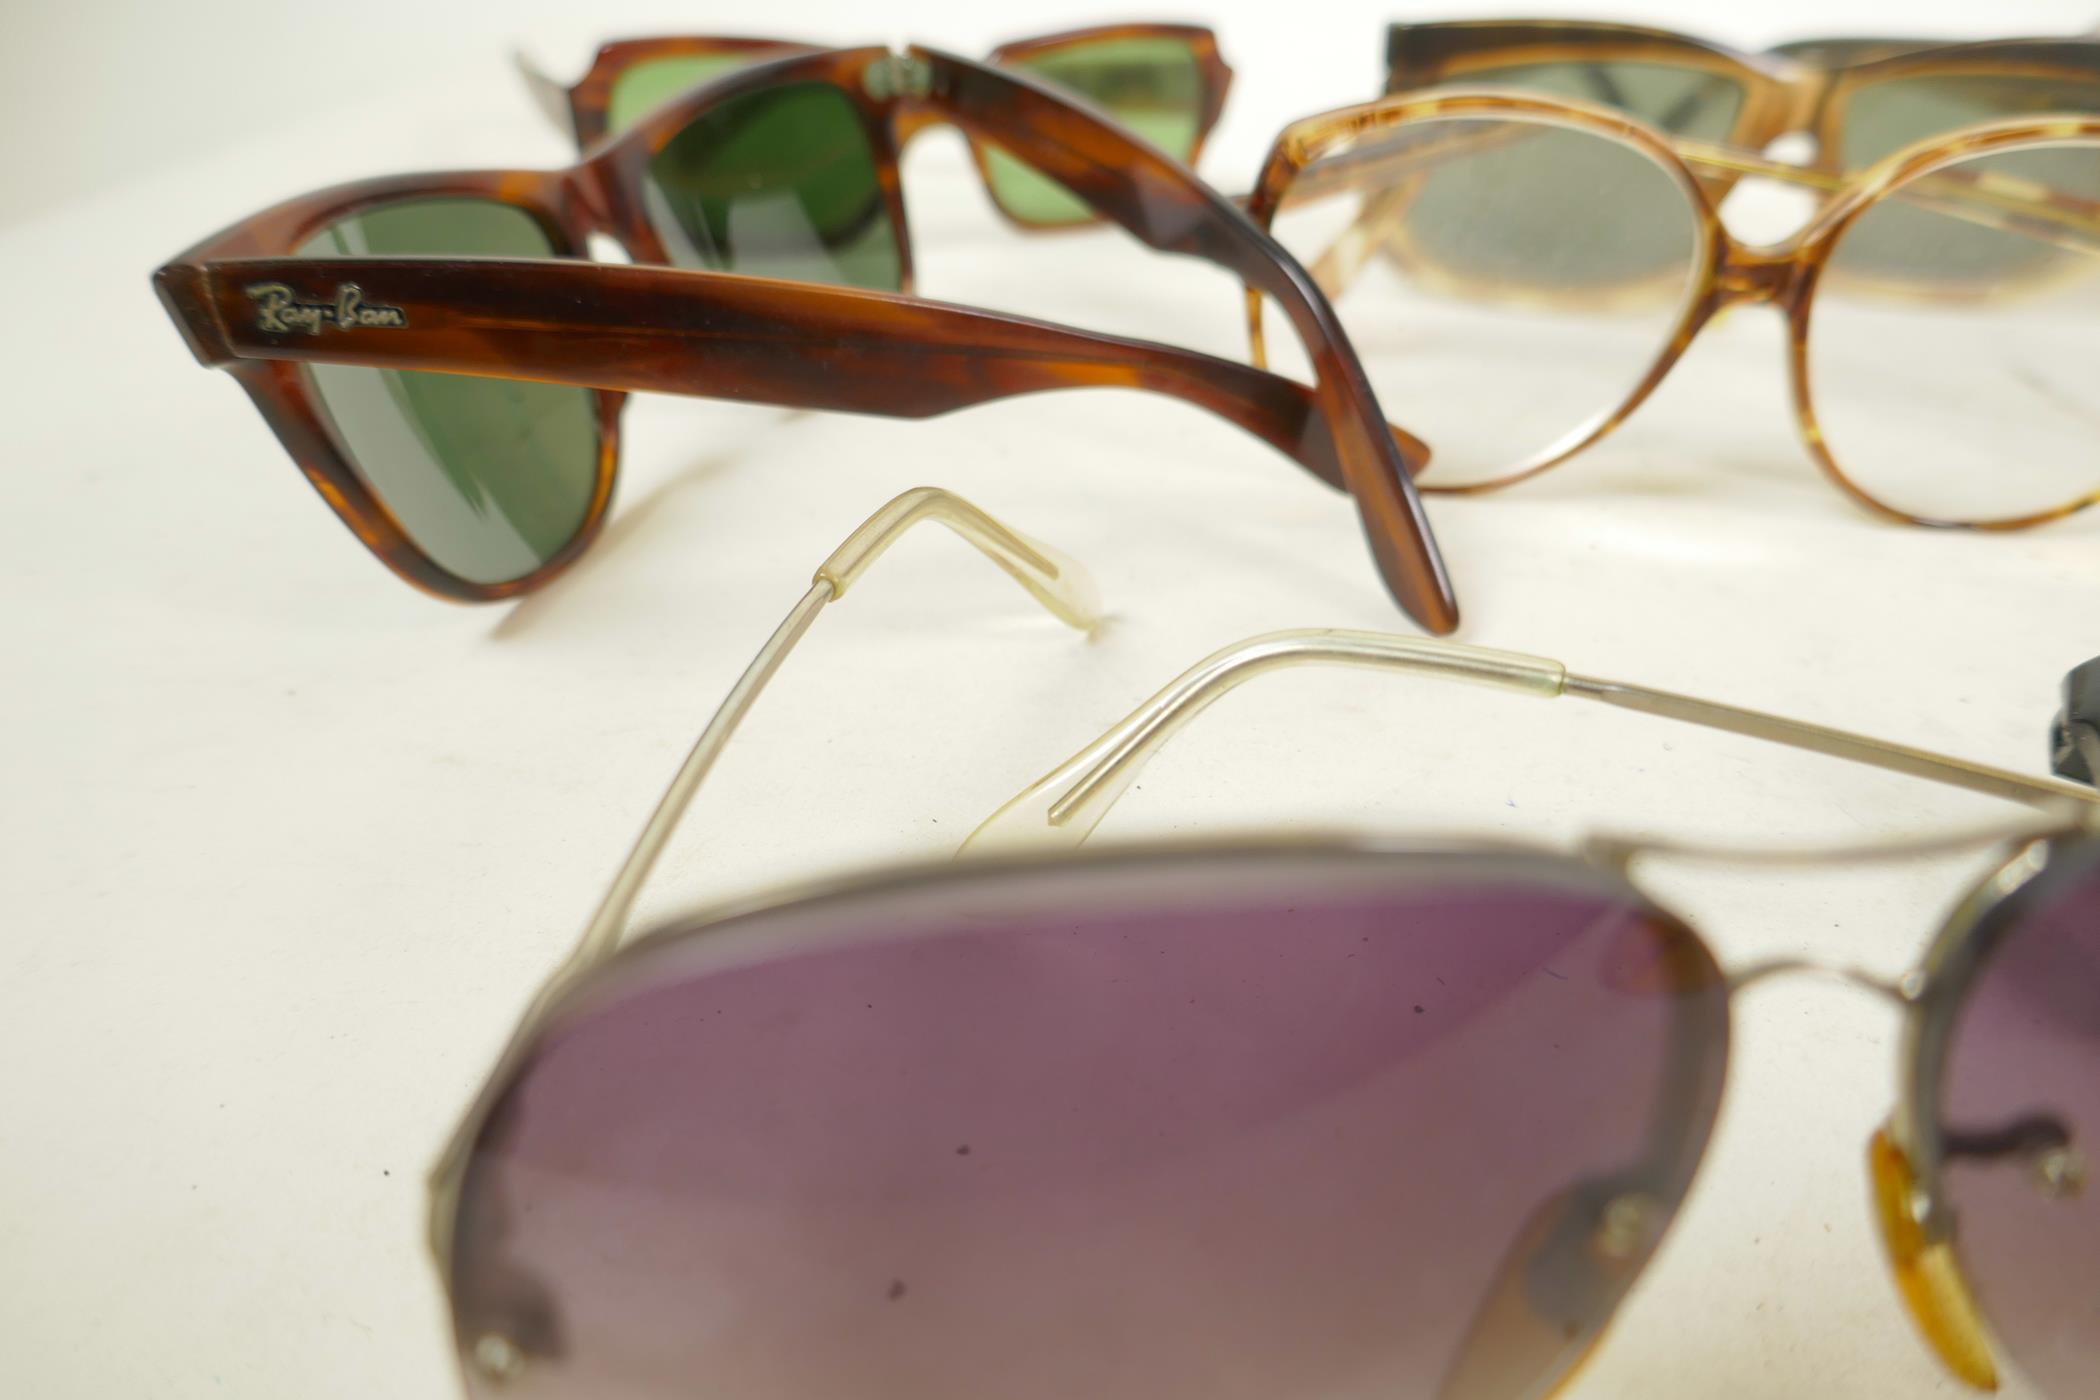 A collection of vintage sunglasses including Ray Bans - Image 4 of 8